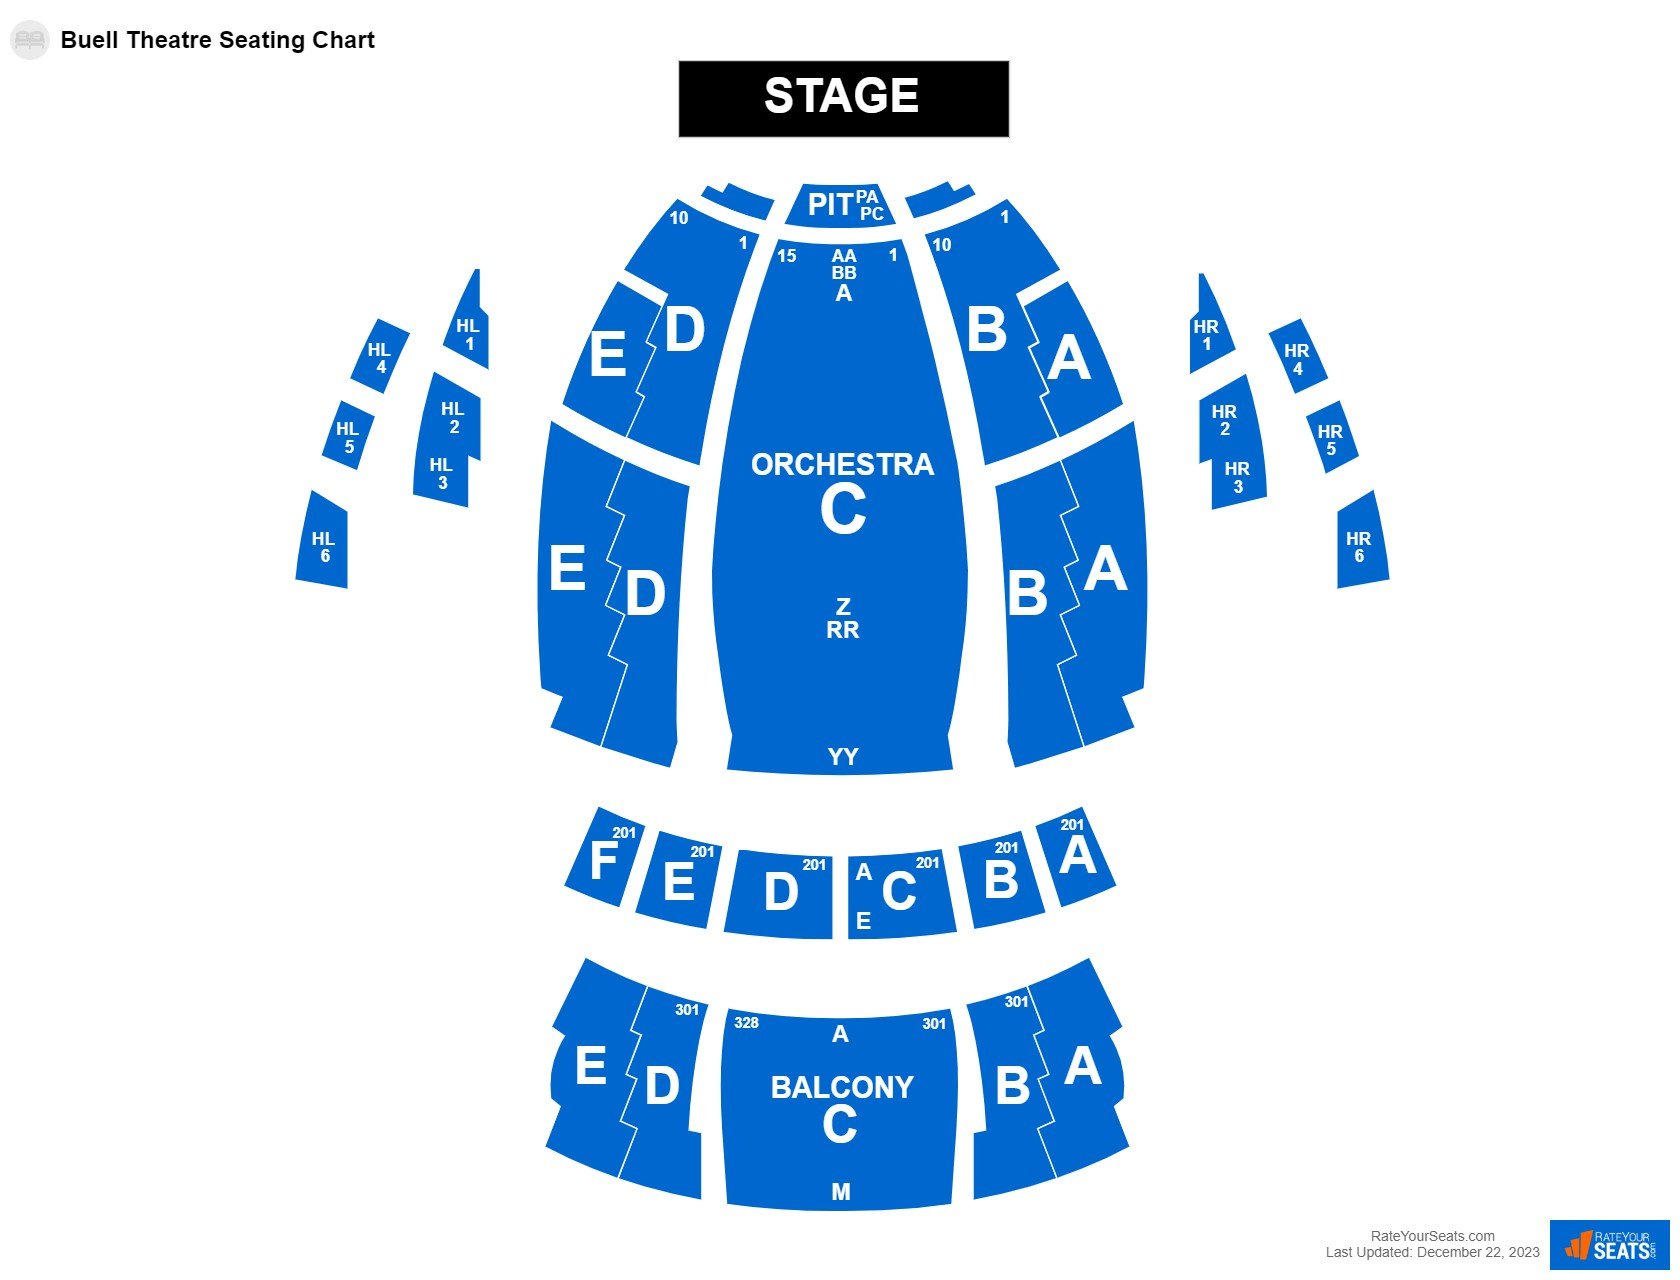 Buell Theatre Seating Chart